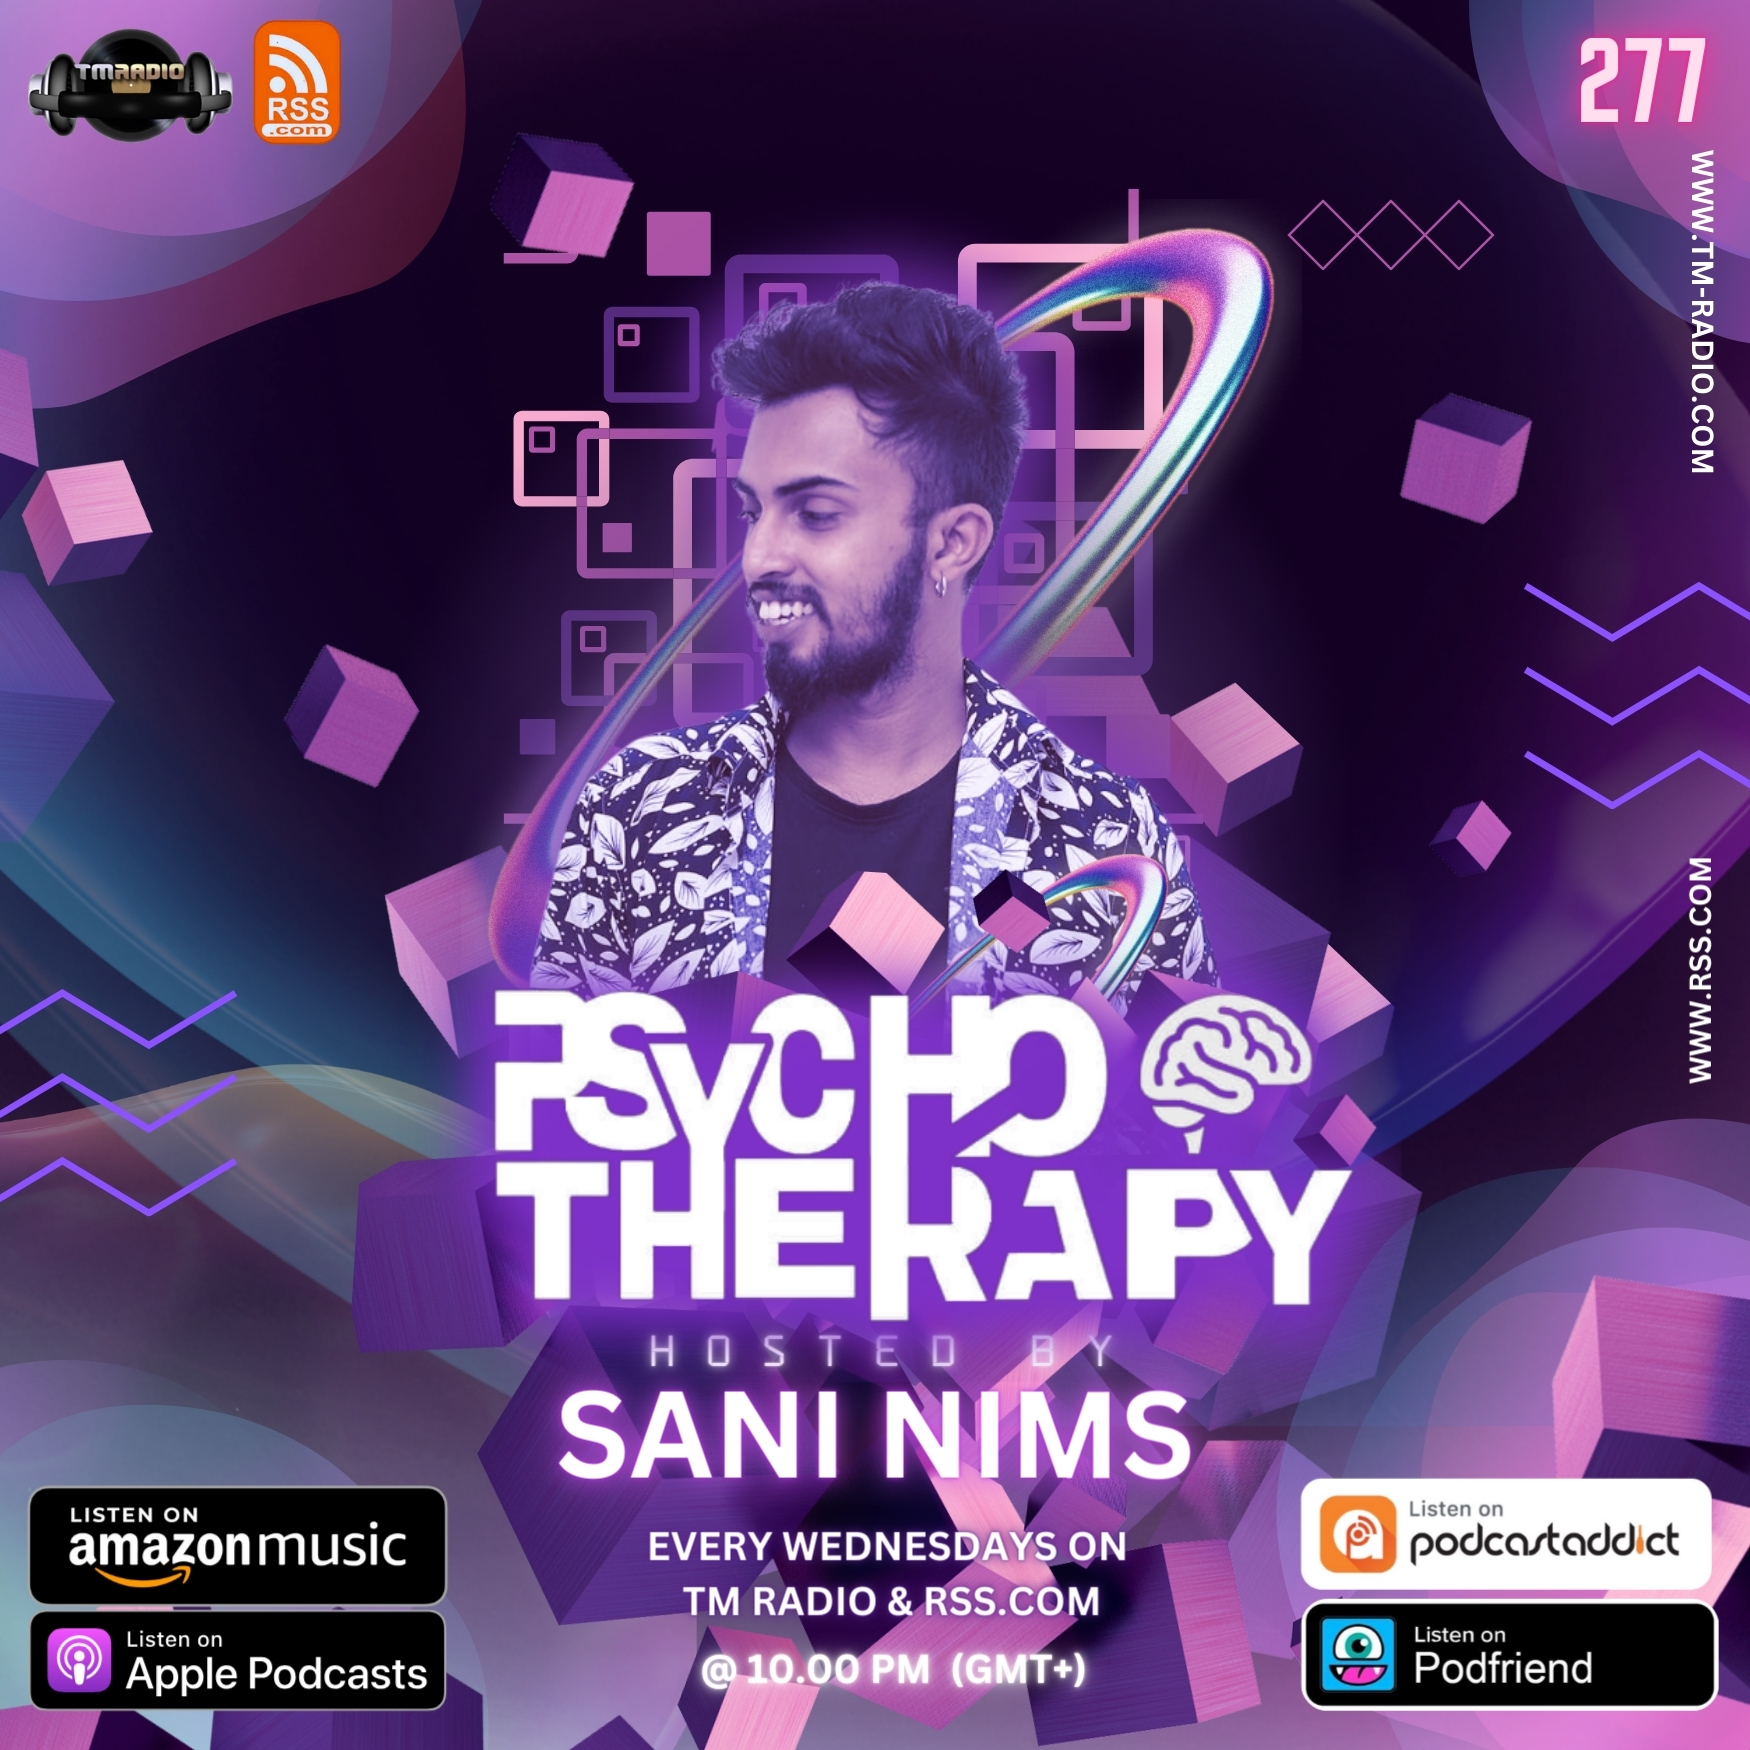 PSYCHO THERAPY EP 277 BY SANI NIMS ON TM RADIO (from January 24th)